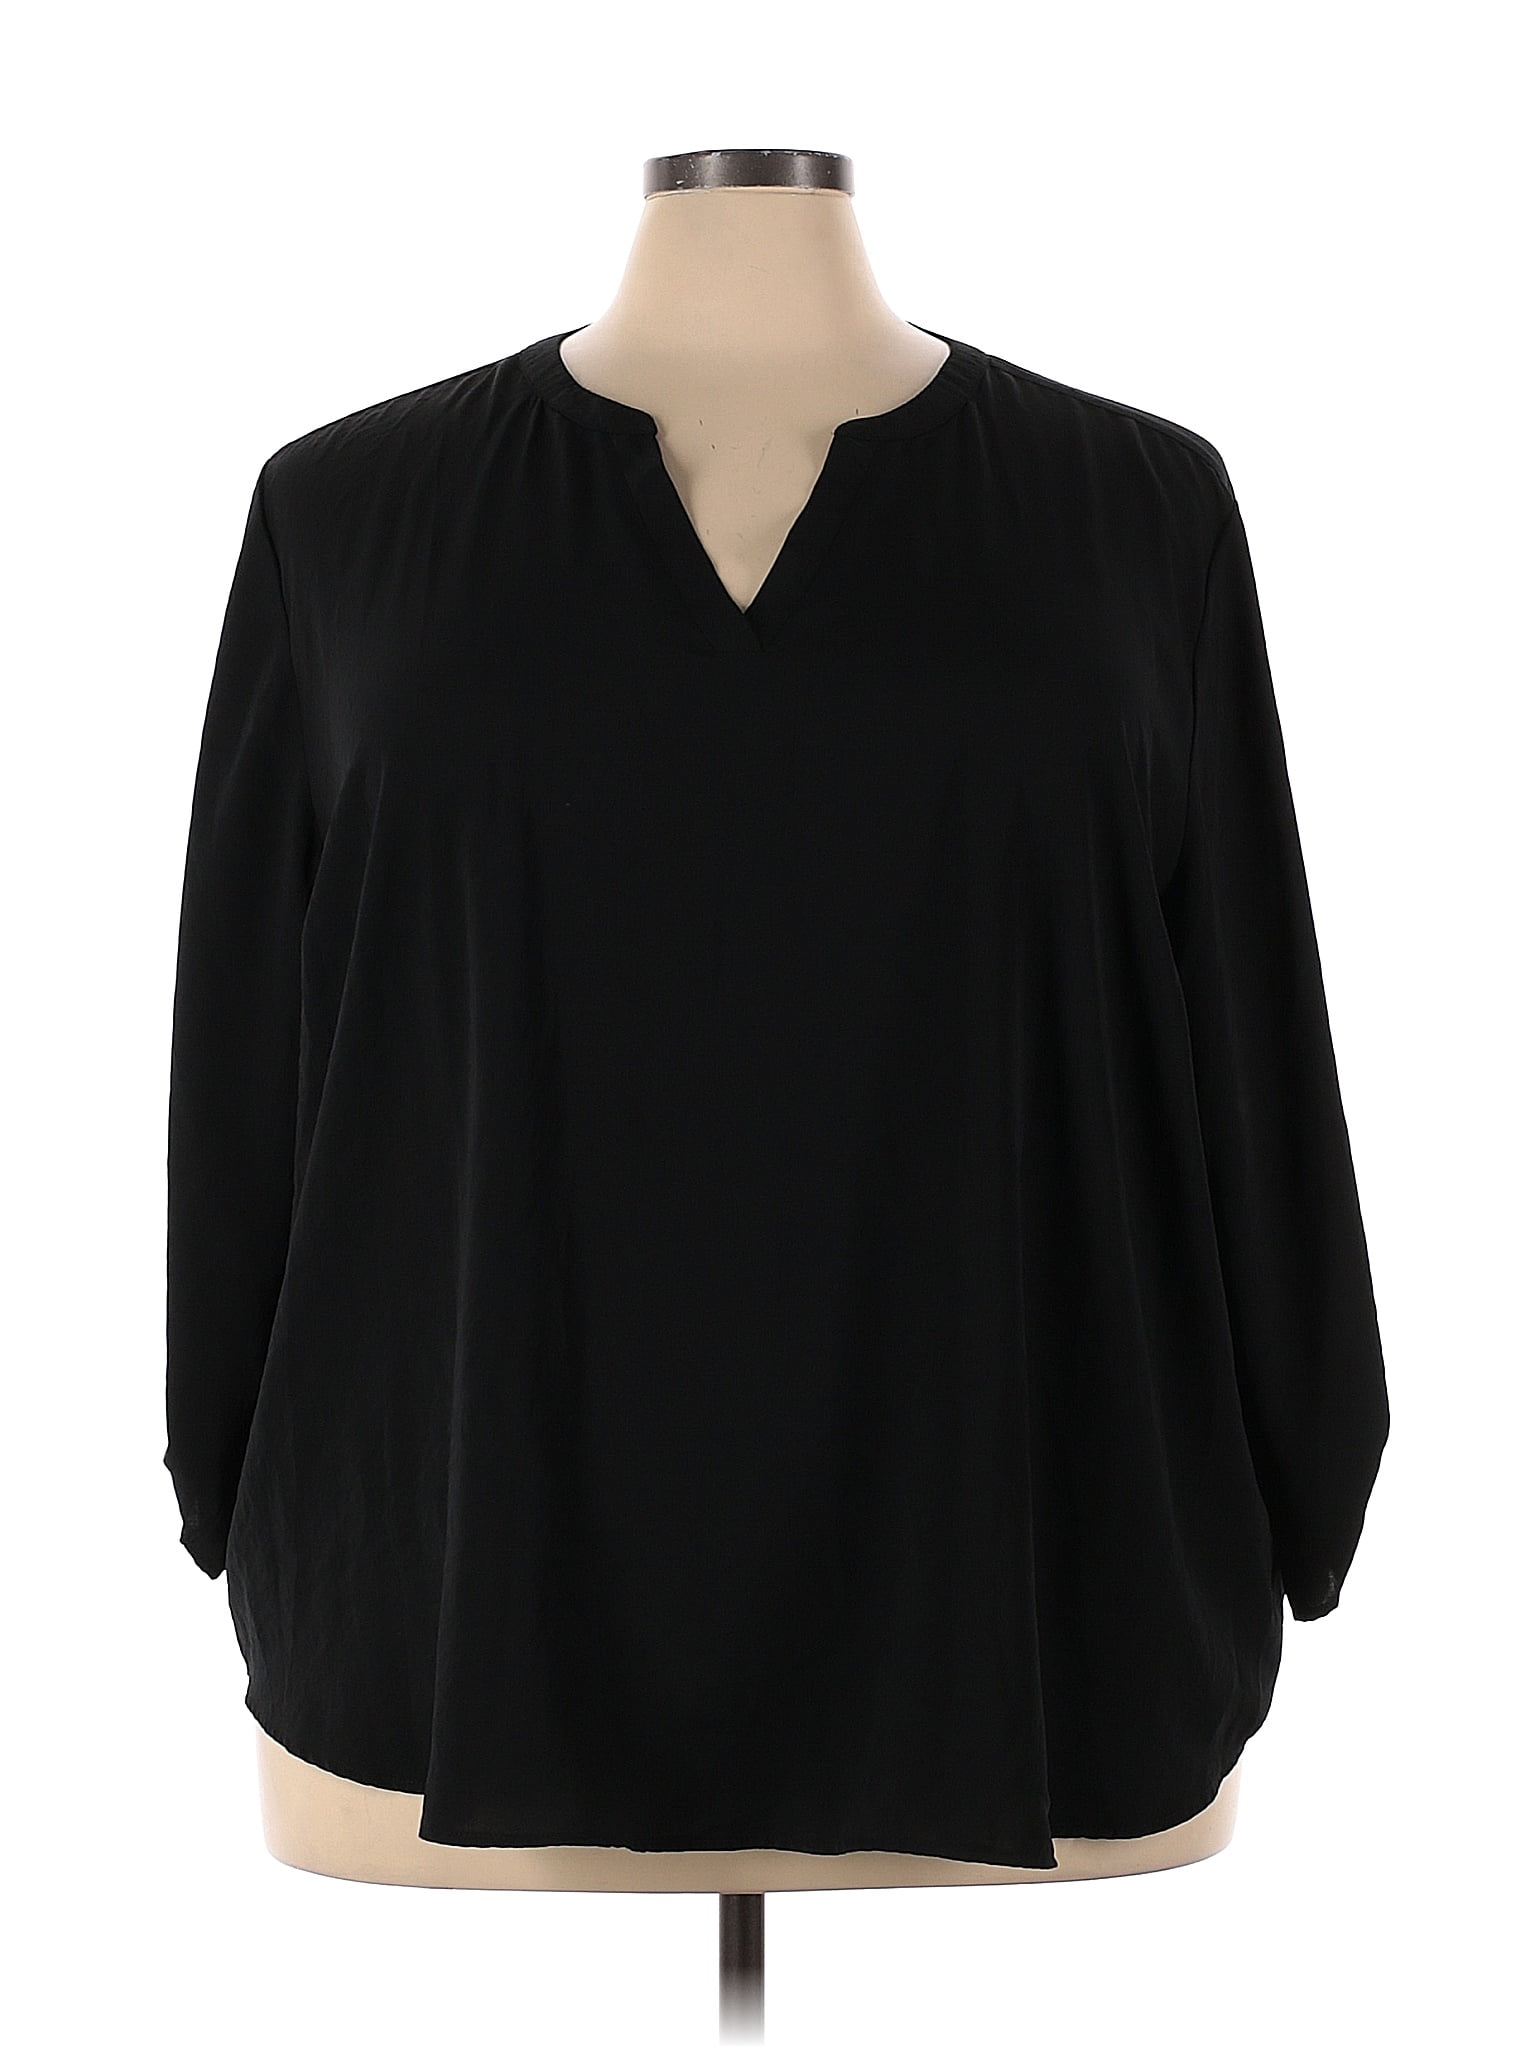 Maurices 100% Polyester Black Long Sleeve Blouse Size 28 (4) (Plus ...